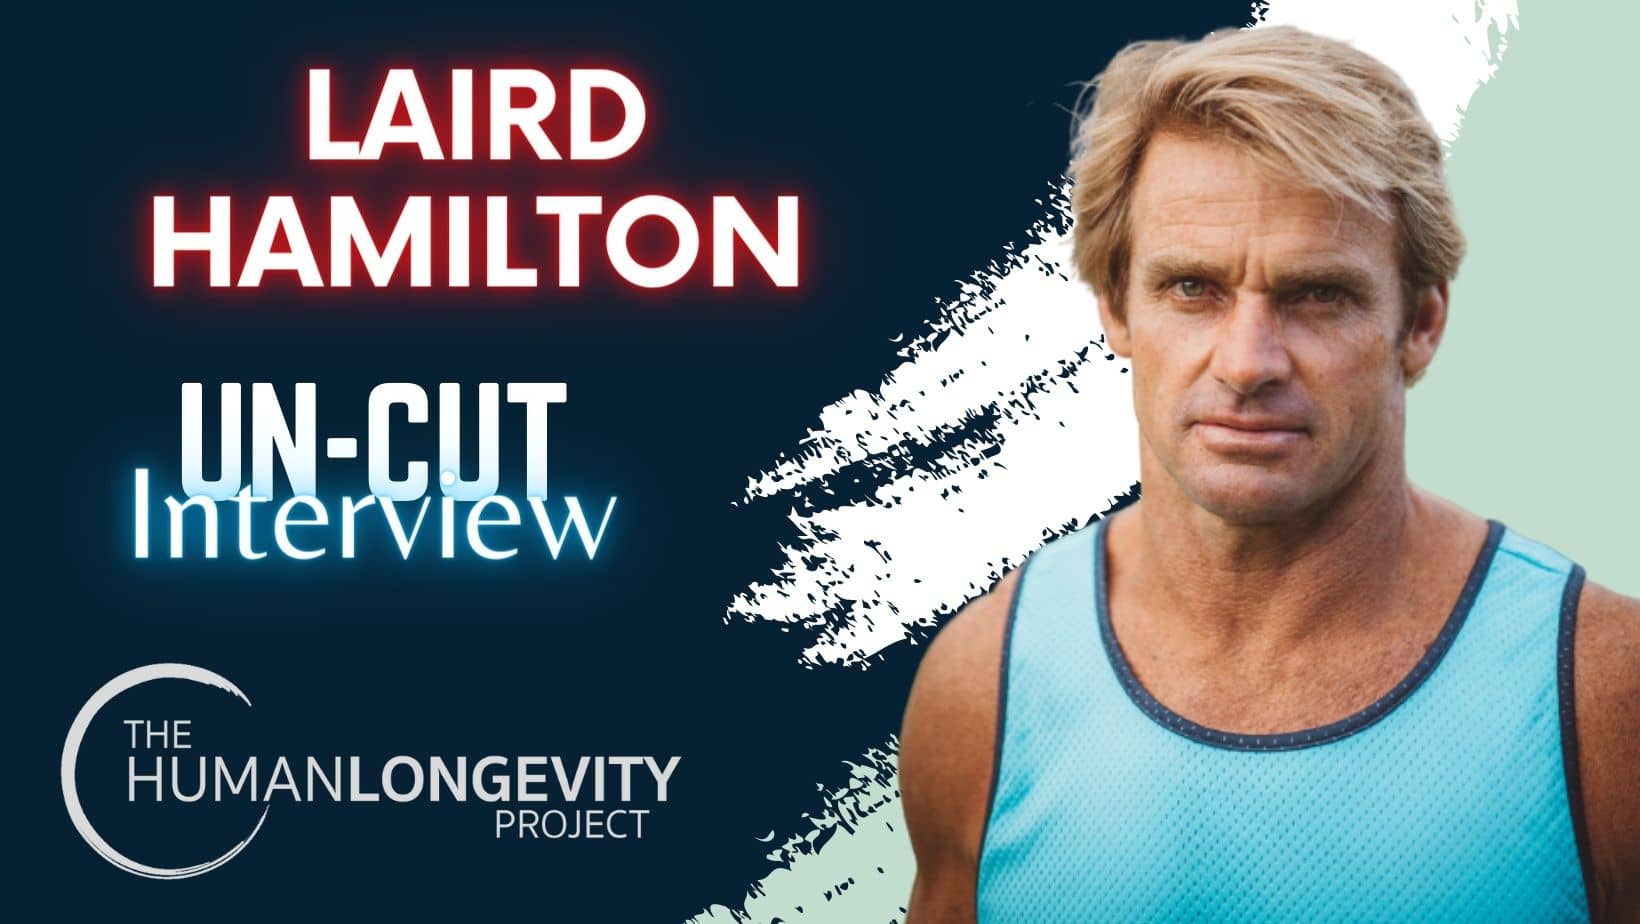 Human Longevity Project Uncut Interview With Laird Hamilton